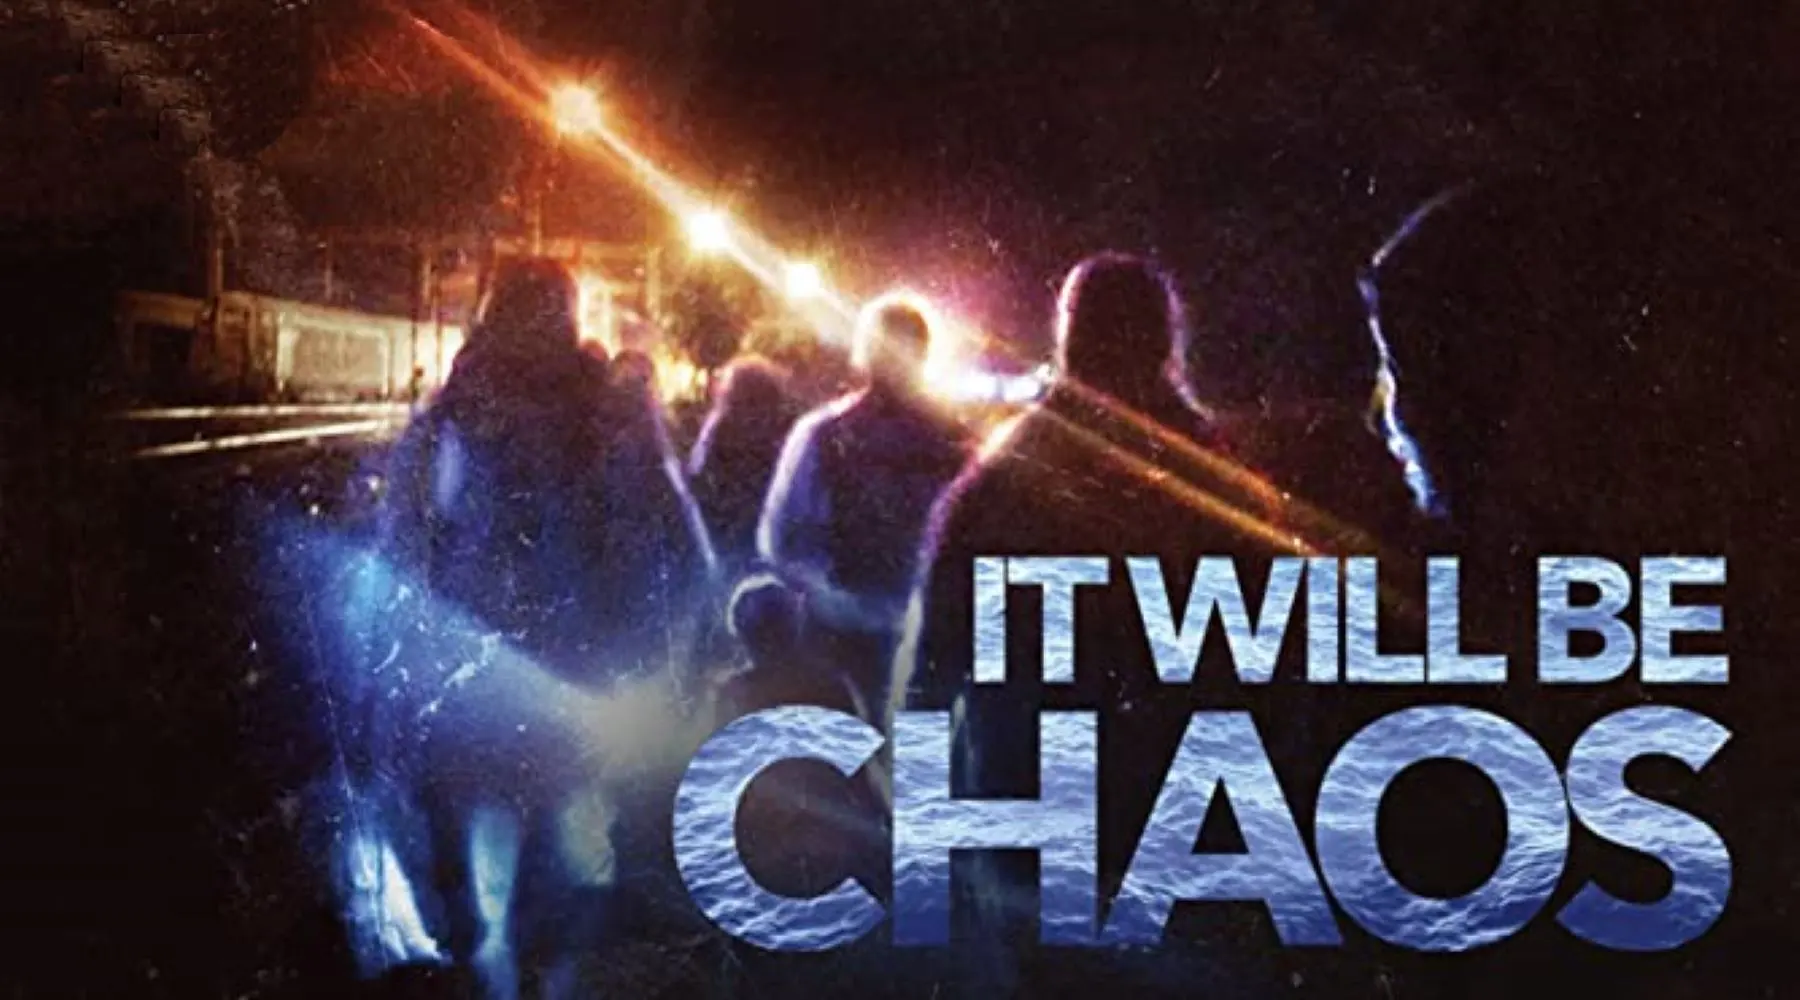 How to watch It Will Be Chaos online in Australia